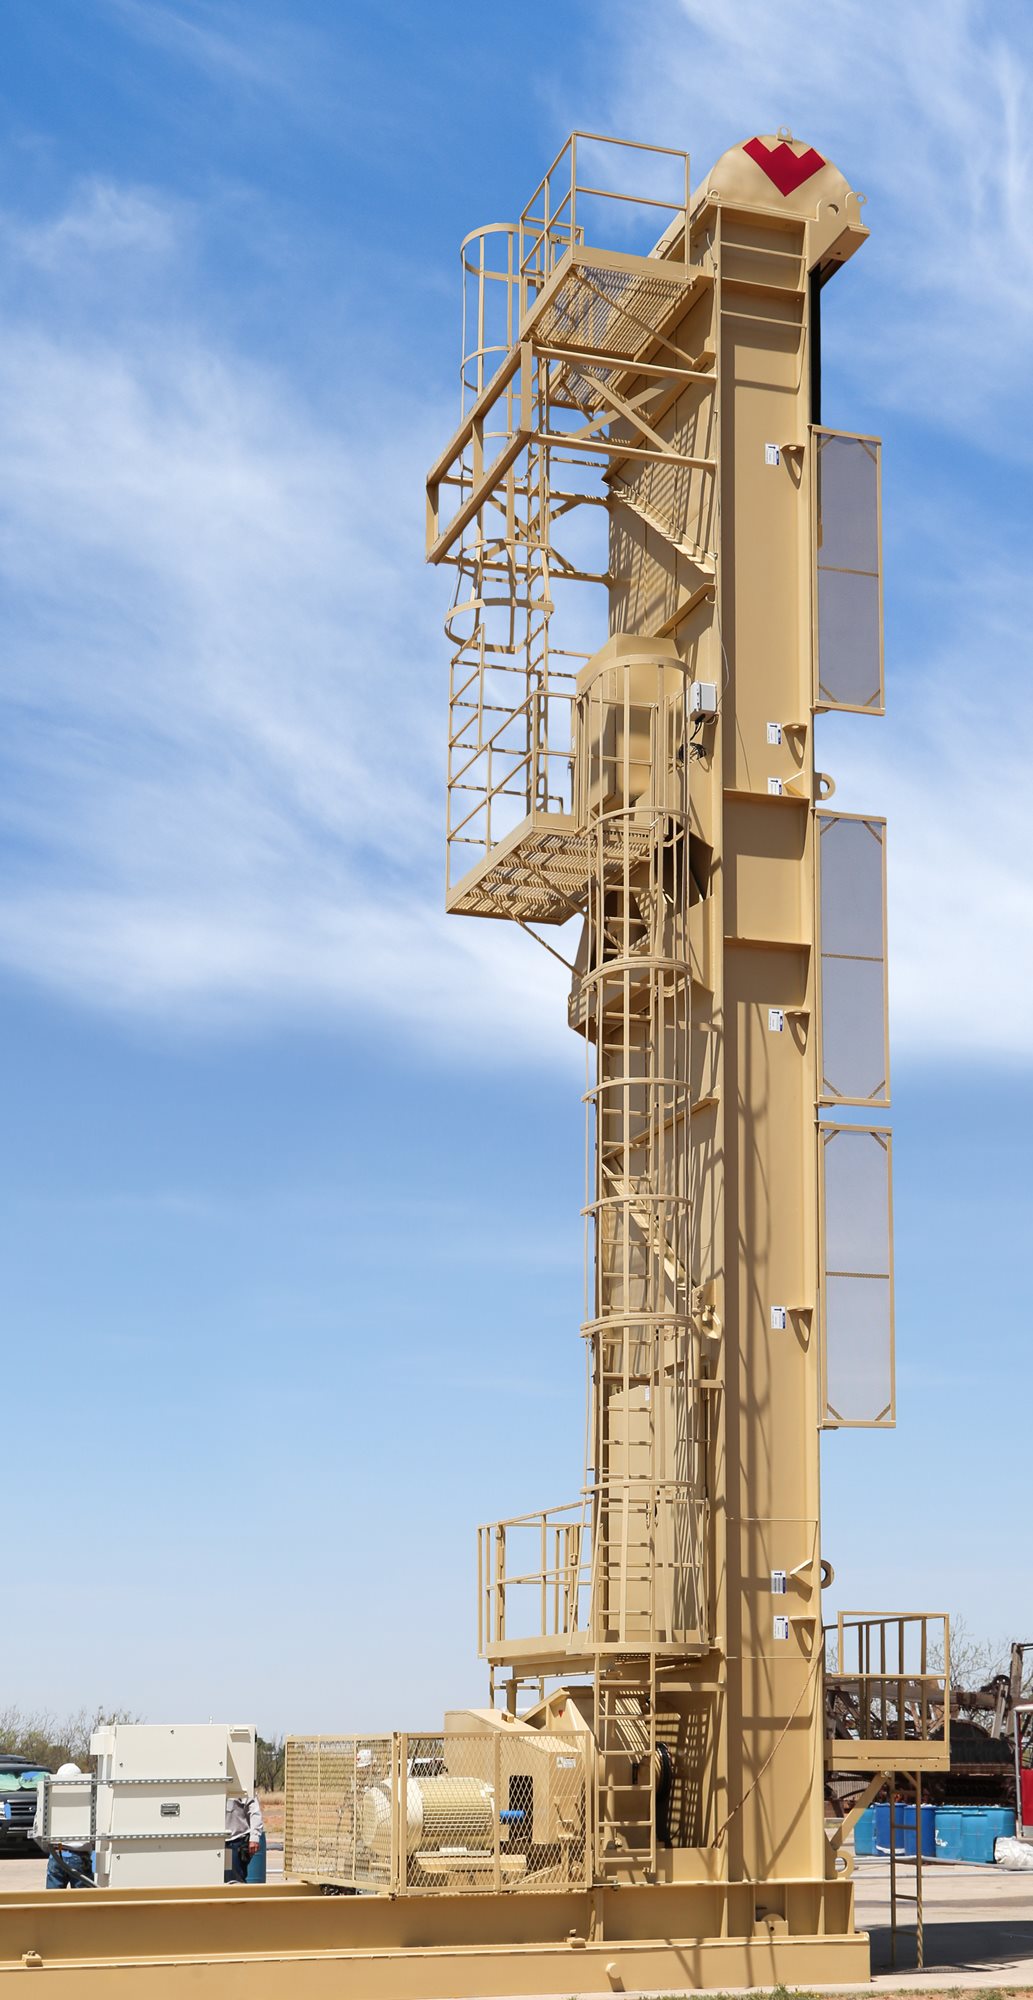 The new Rotaflex long-stroke pumping unit leverages decades of field experience to provide operators with an easy-to-maintain, high-performance option for producing challenging wells.